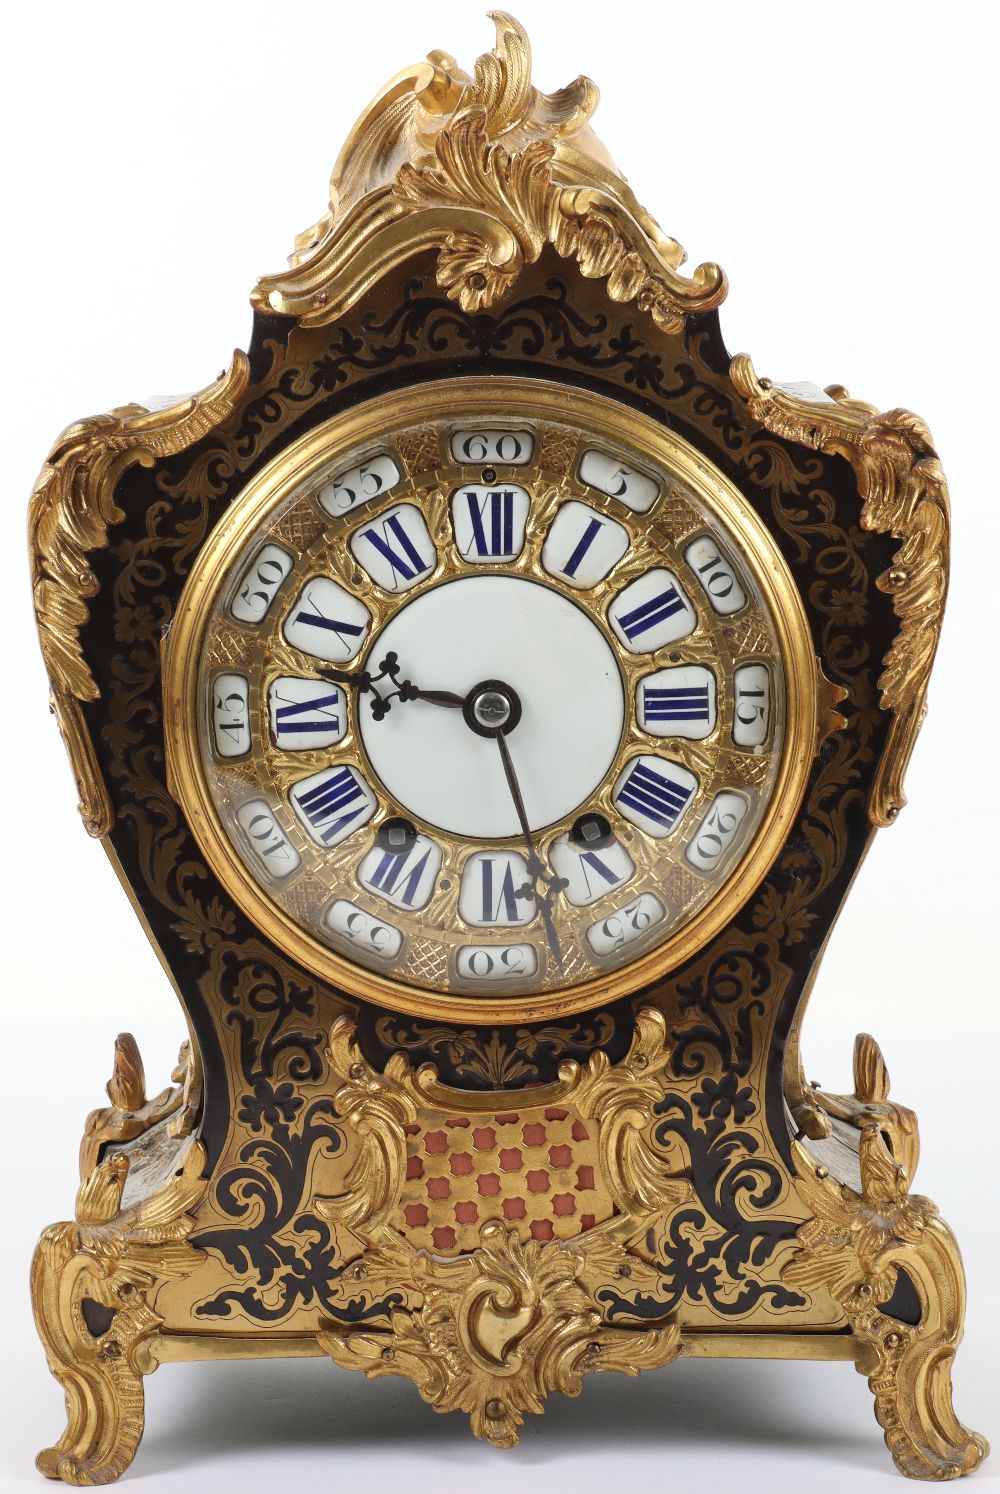 A mid 19th century gilt metal mantel clock, dial and movement marked 'James & Walter Marshall, Paris